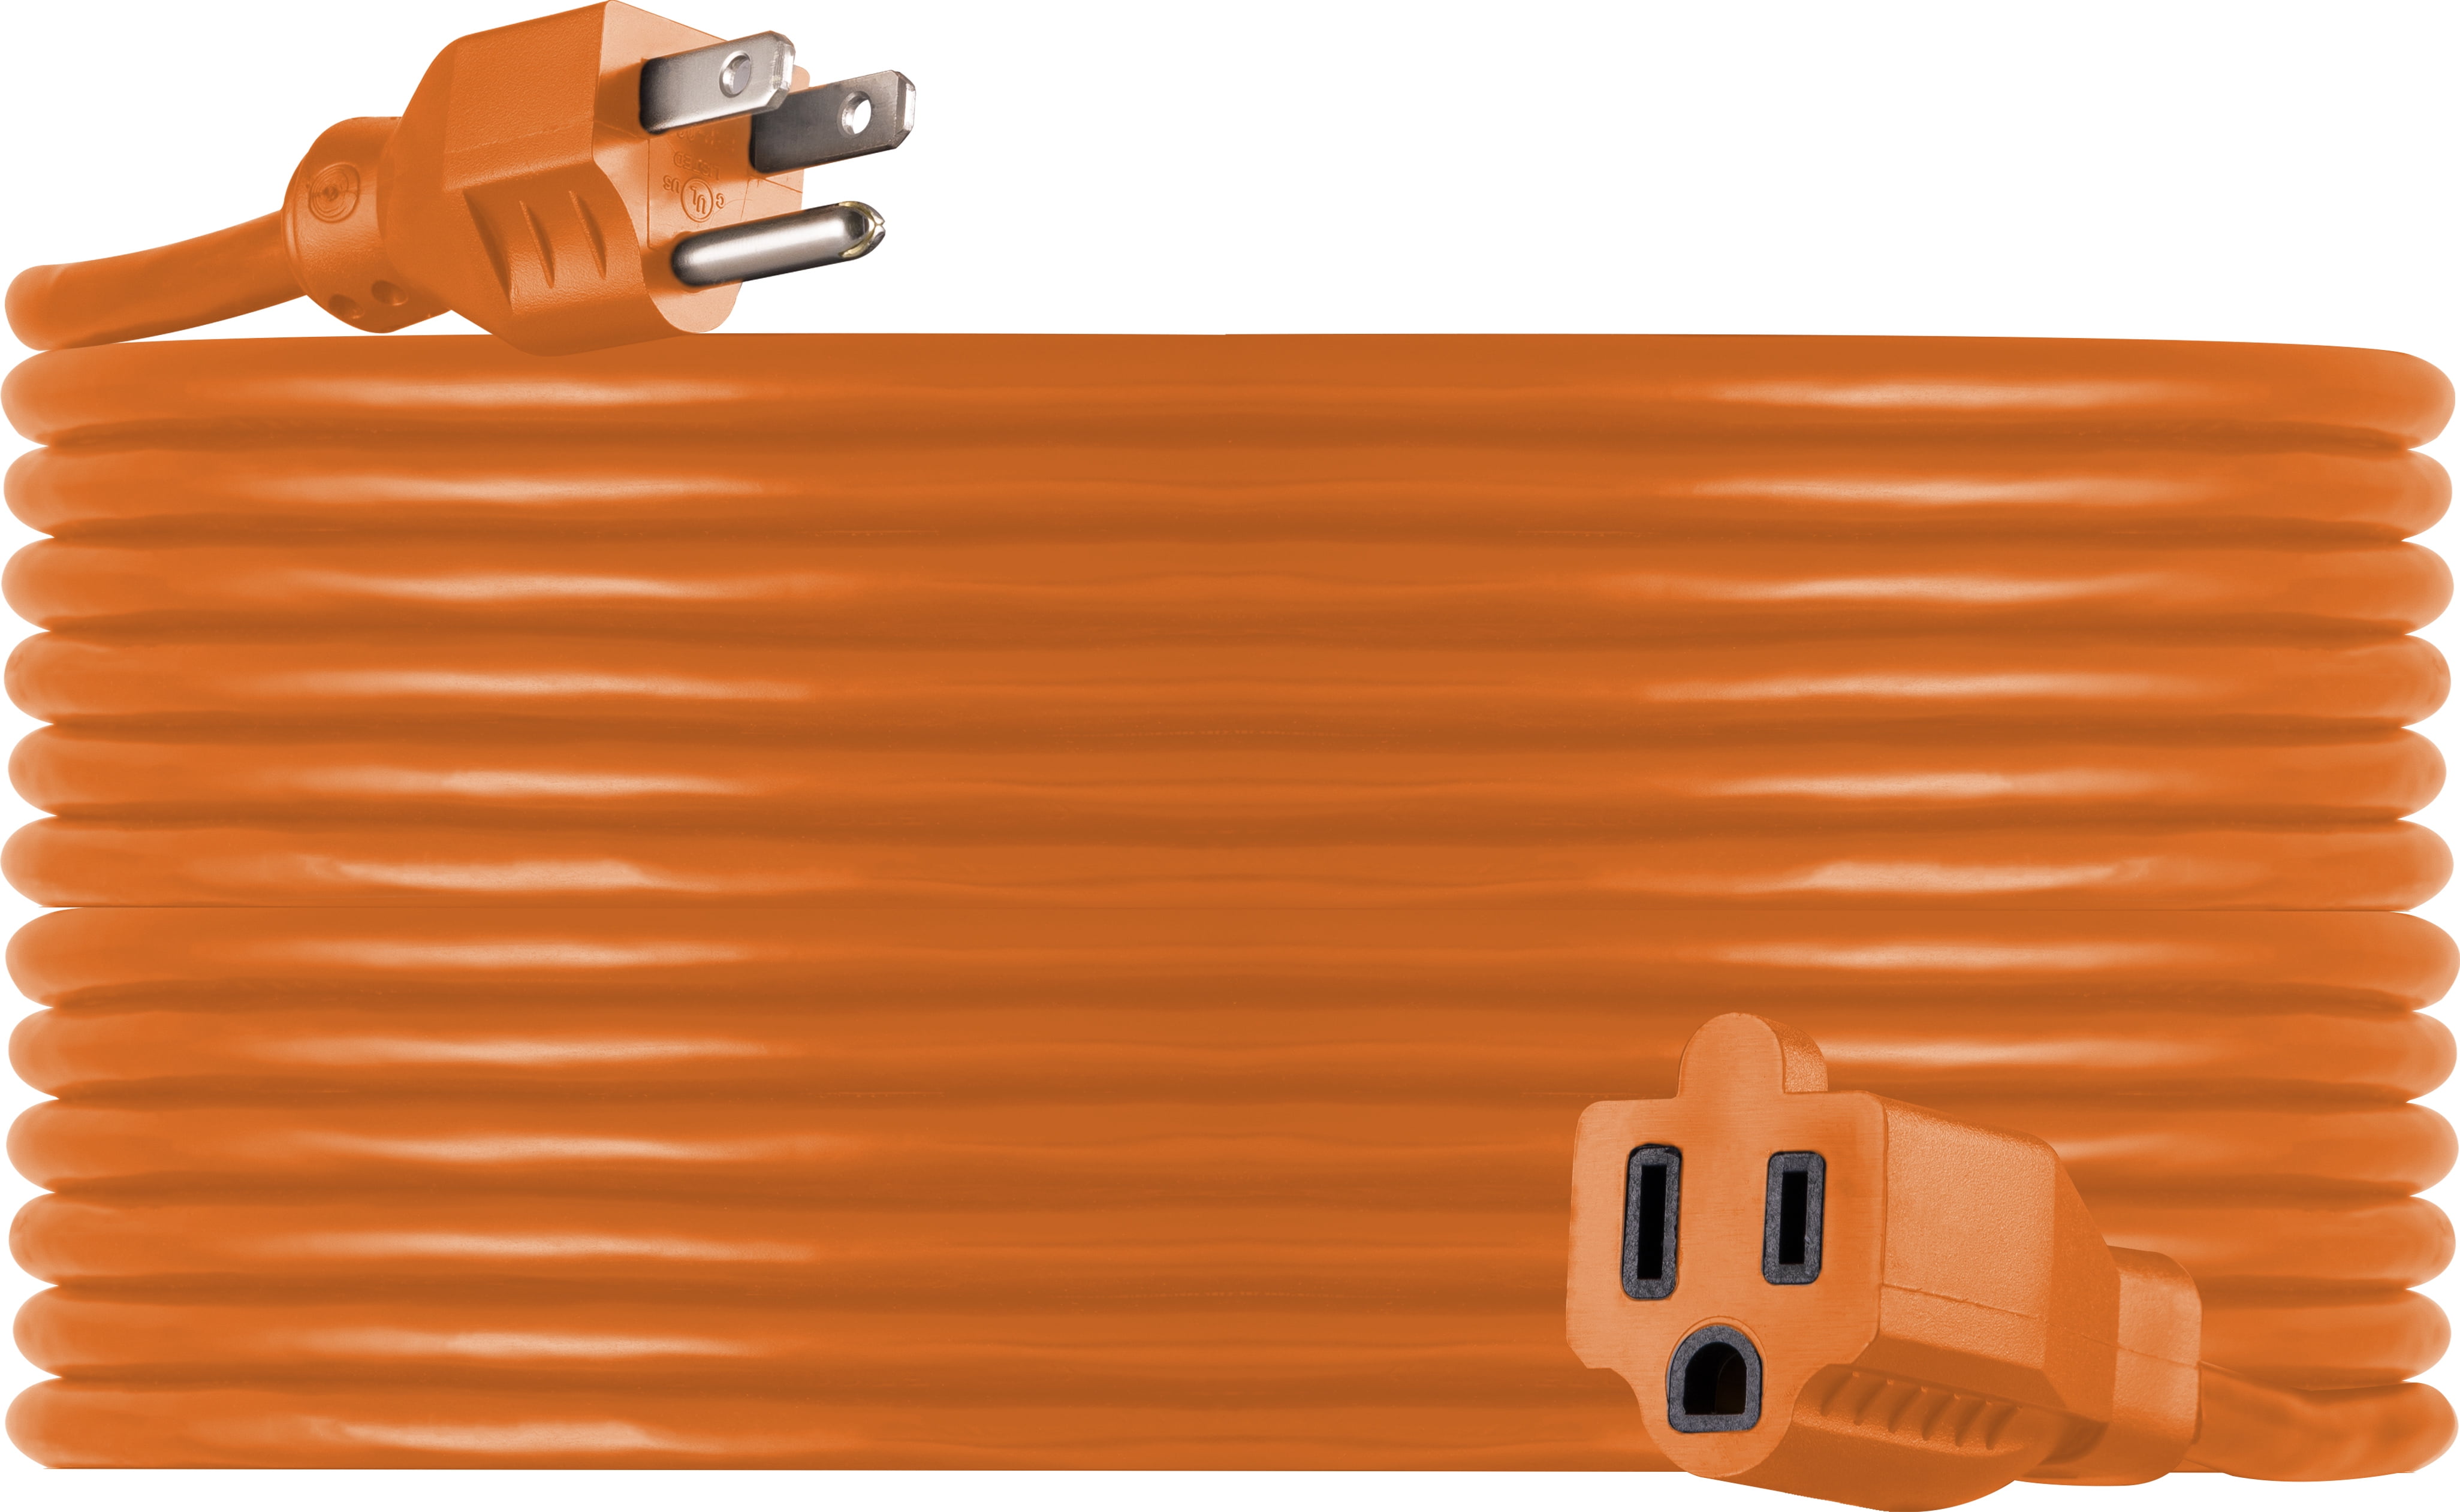 GENERAL ELECTRIC UltraPro Grounded Extension Cord, 50ft. Outdoor, Orange,  16-Gauge – 51926 